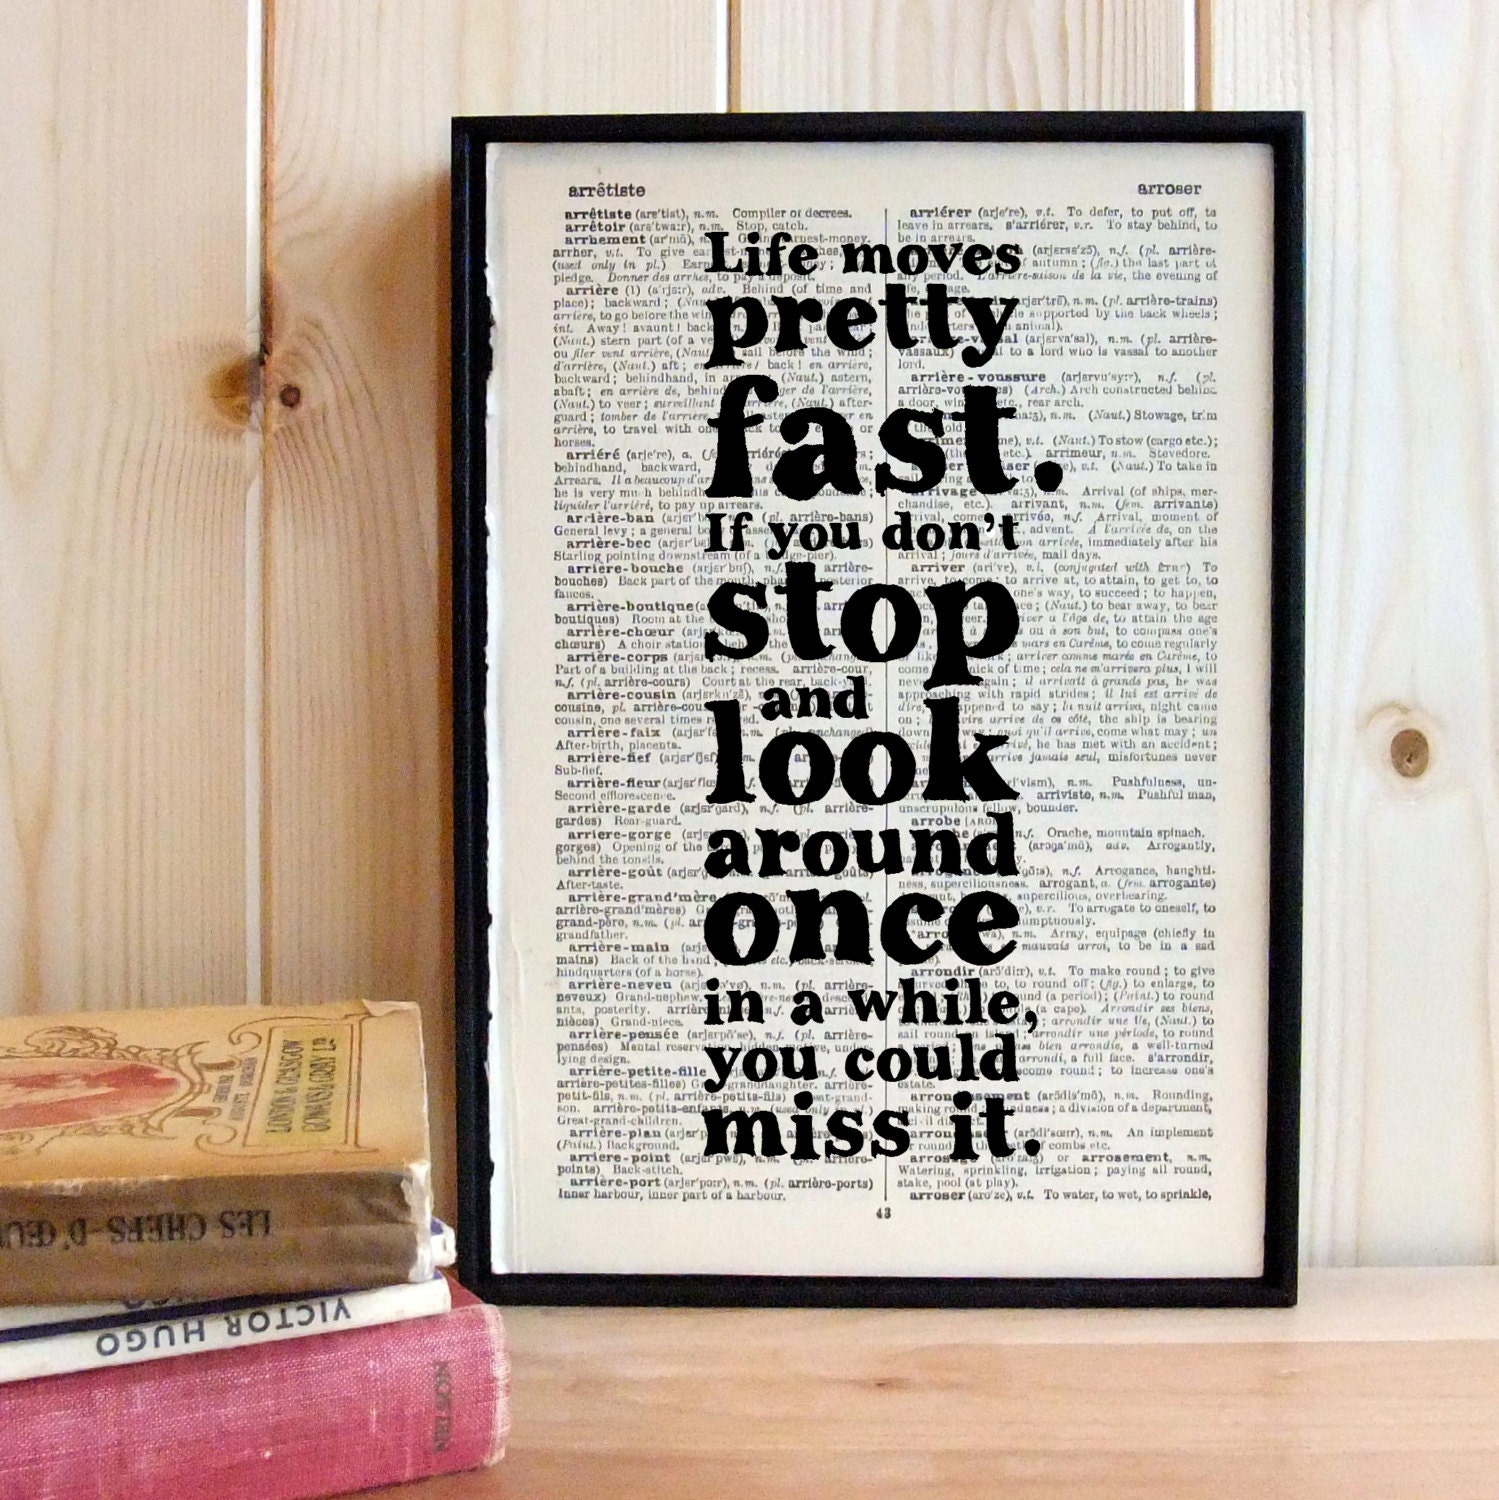 Inspirational Quote Life Moves Pretty Fast Ferris Bueller framed art on vintage book page graduation gift - BookishlyUK